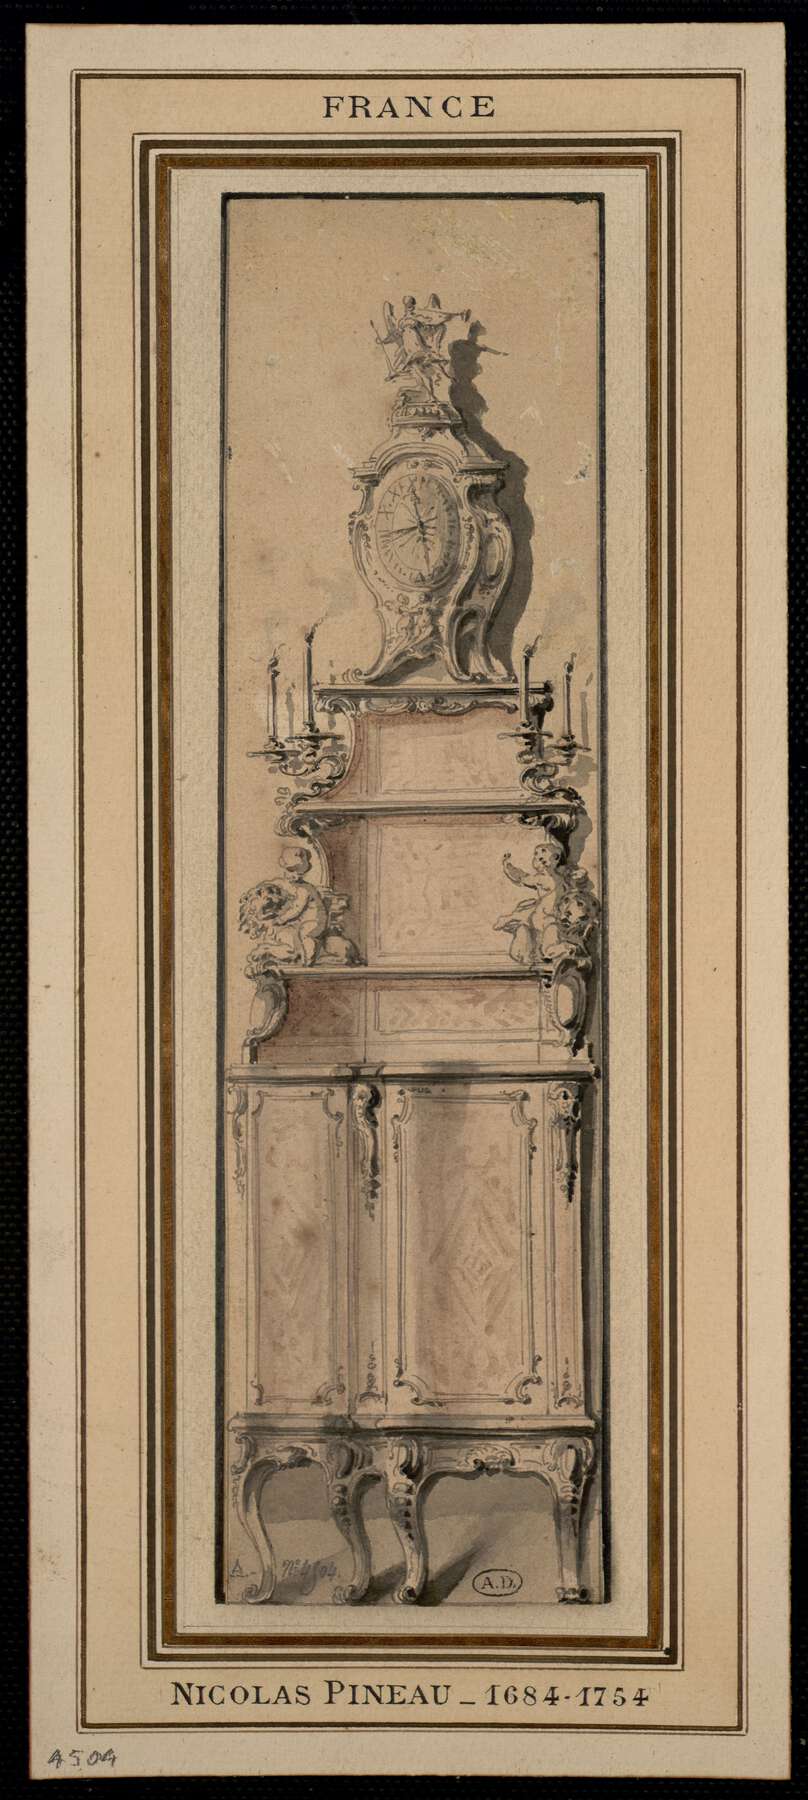 black, white, gray, and brown drawing of an elaborate corner cabinet, with “France” written at the top of the picture and “Nicolas Pineau_1684-1754” written at the bottom